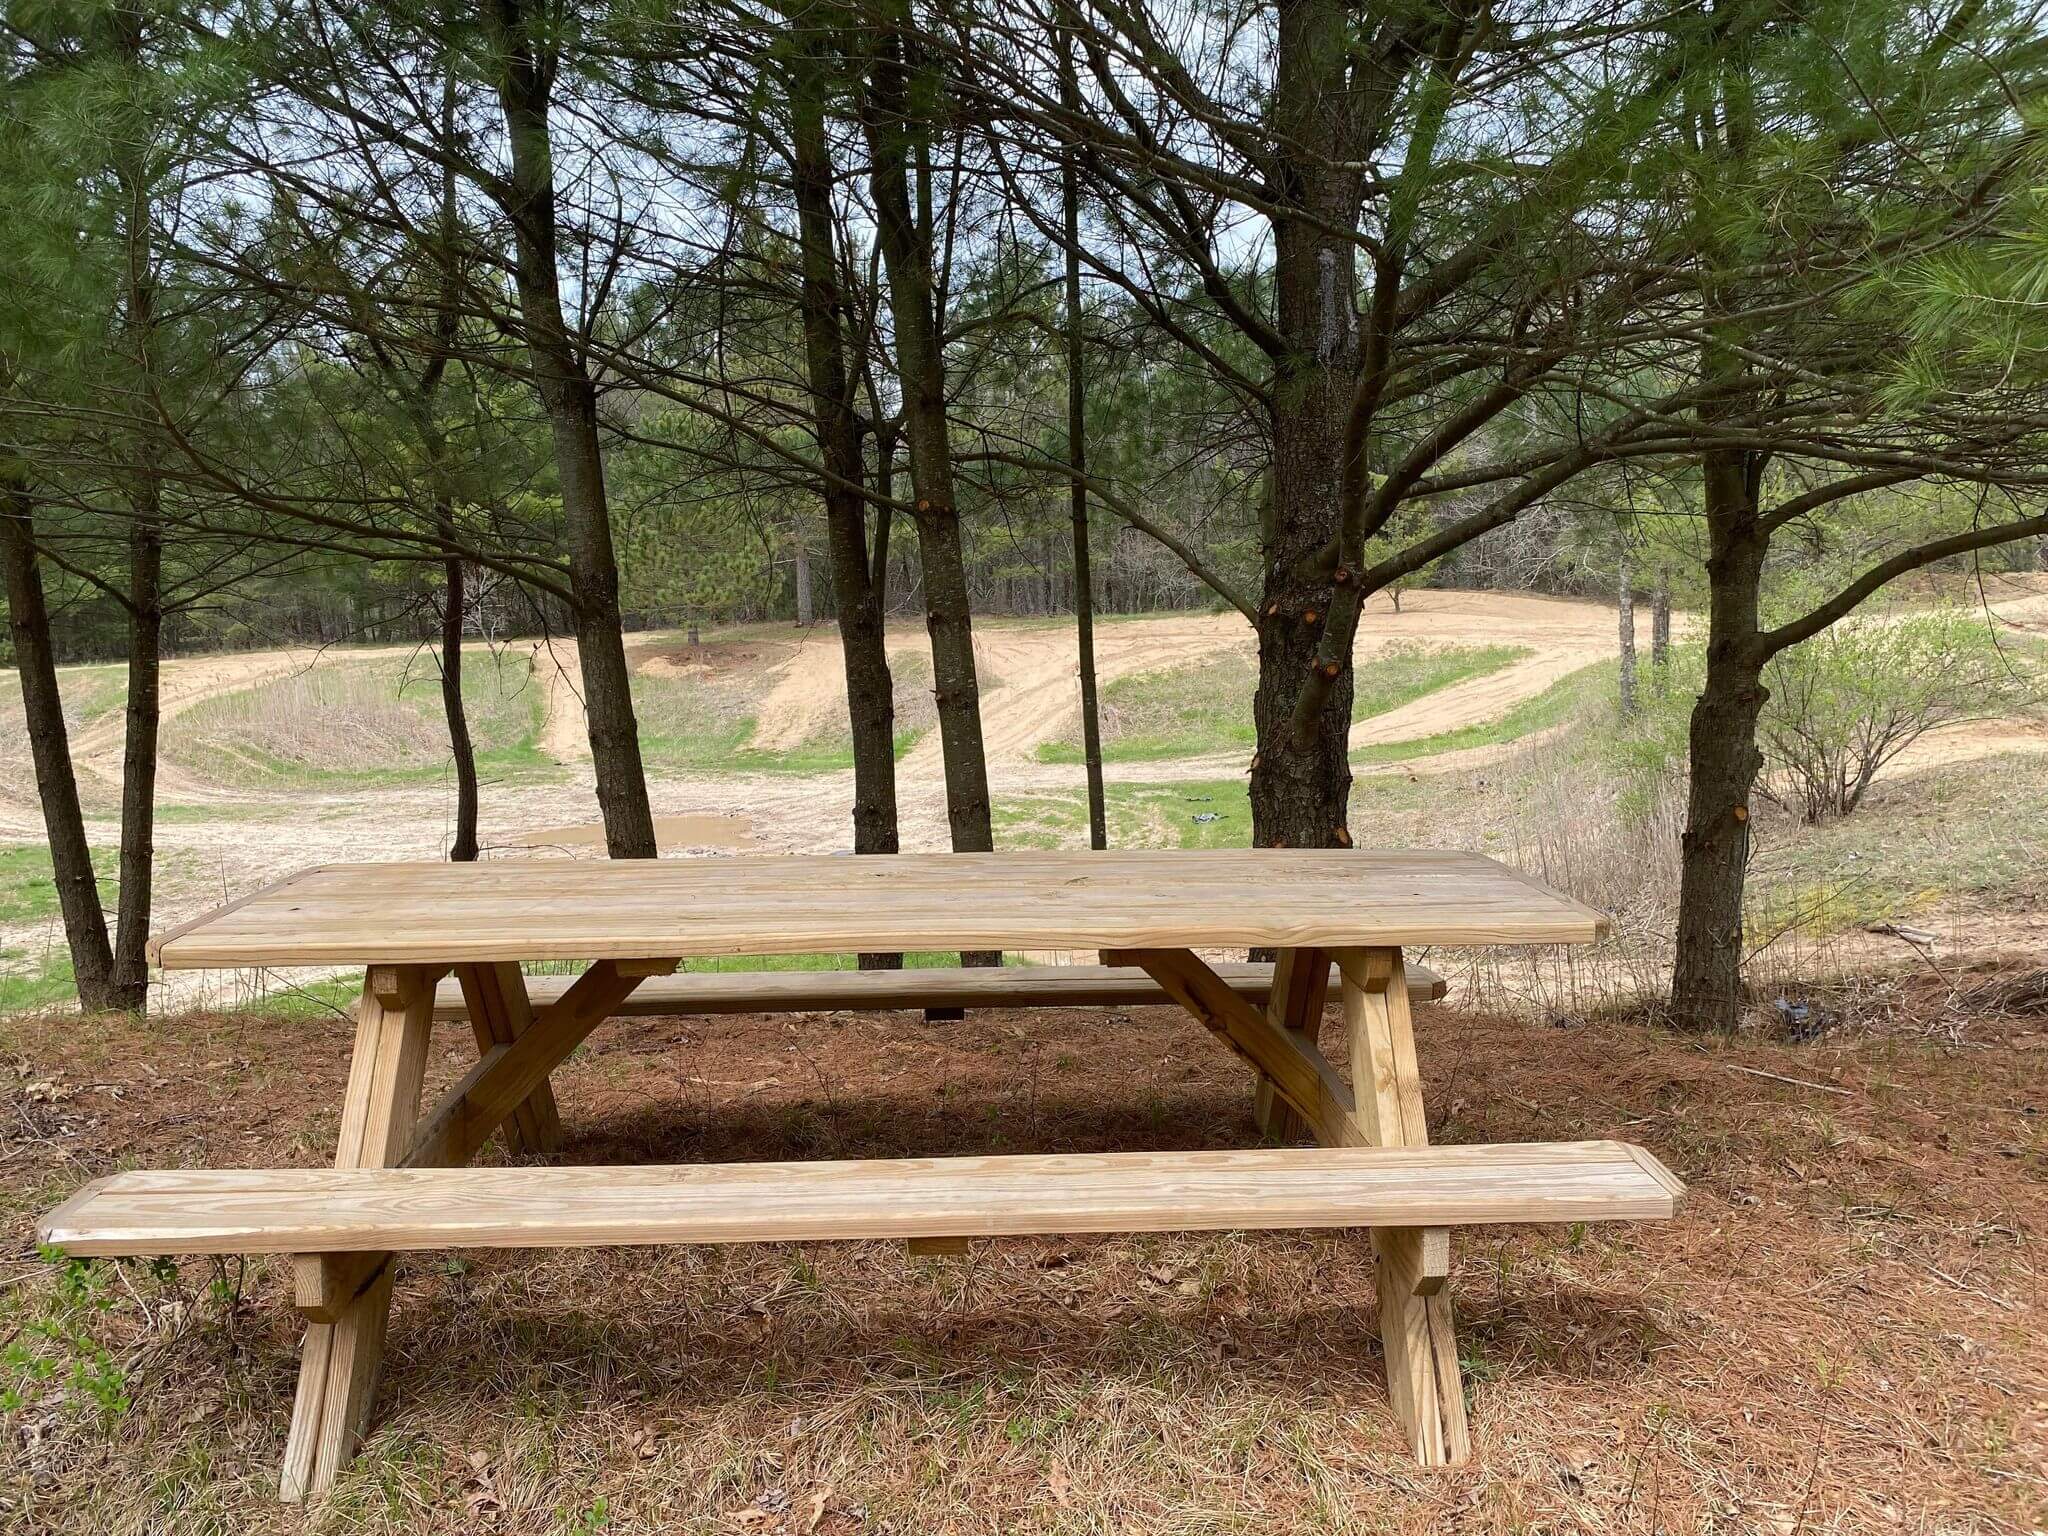 Picnic Table overlooking a trail